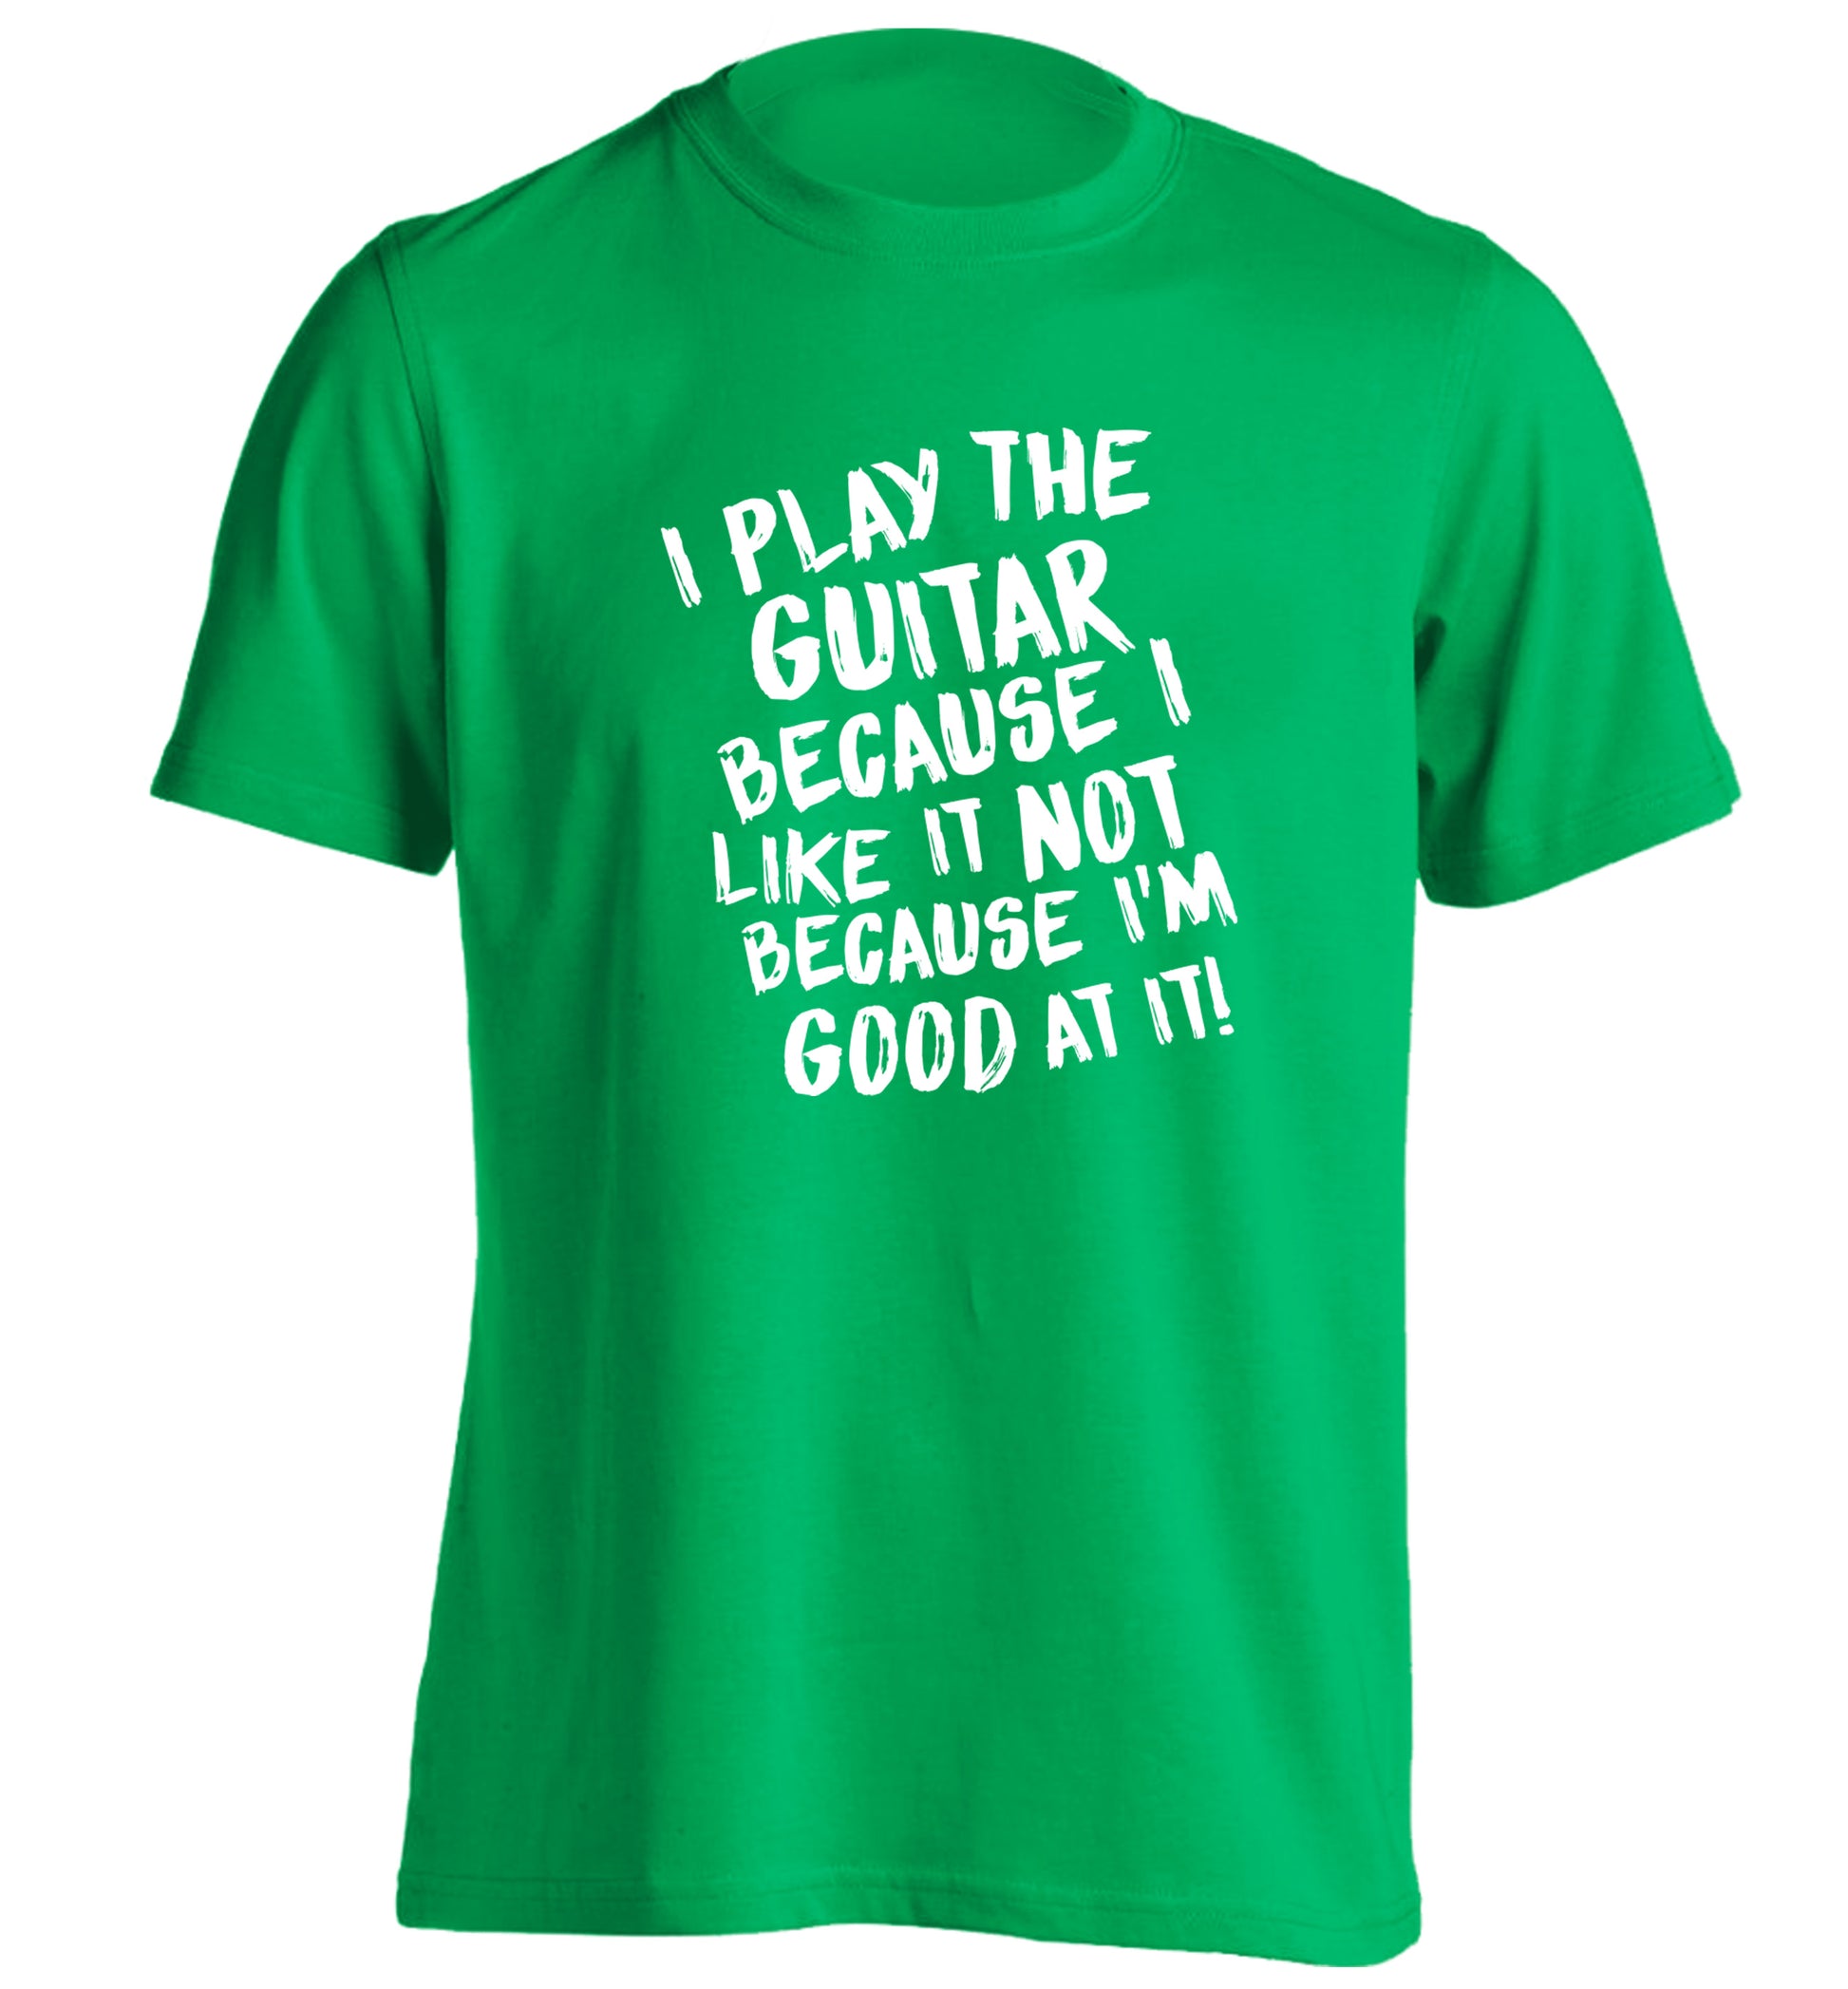 I play the guitar because I like it not because I'm good at it adults unisex green Tshirt 2XL